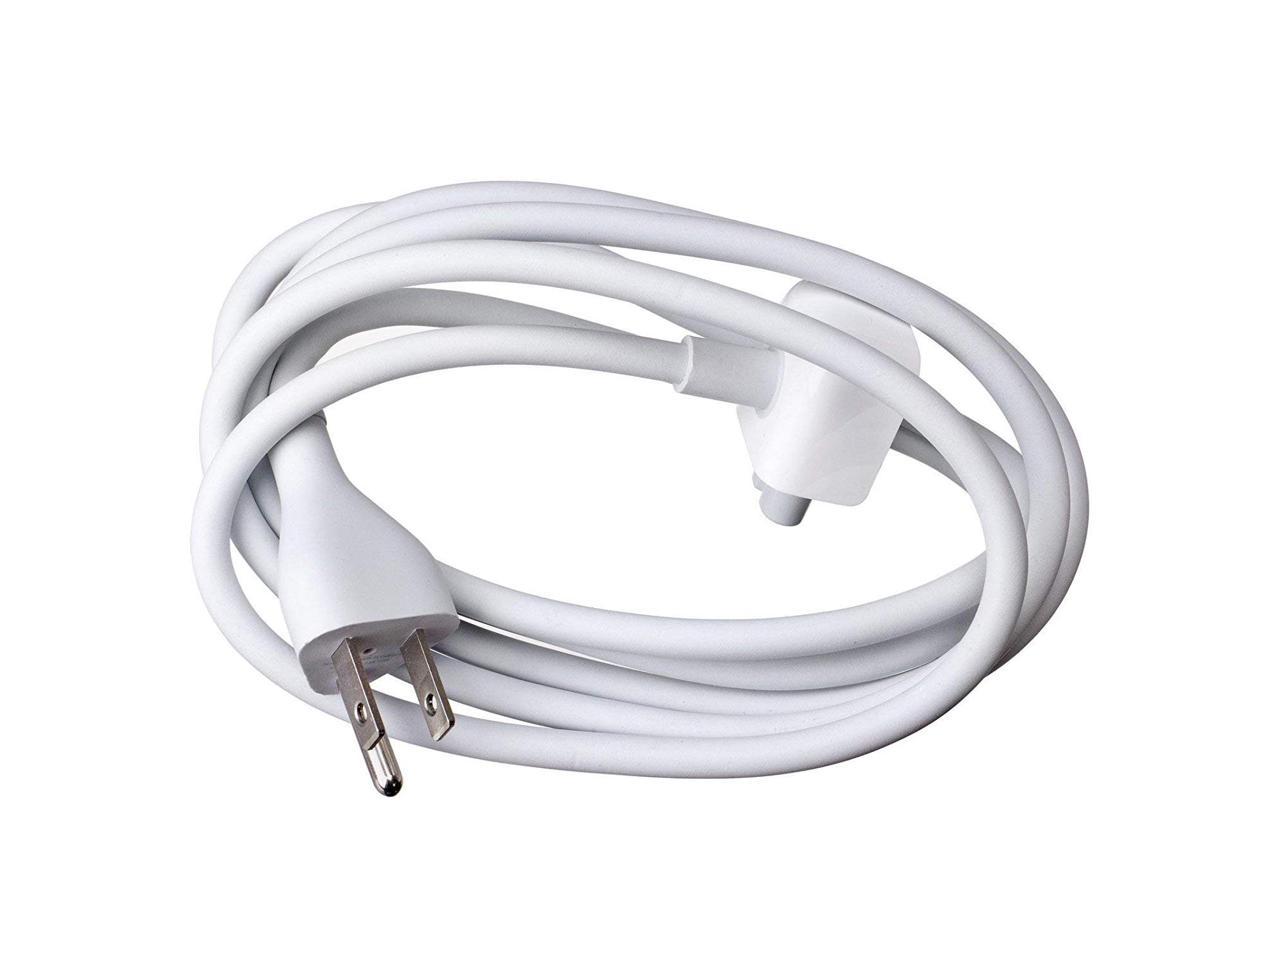 macbook air 13 inch charger with extension